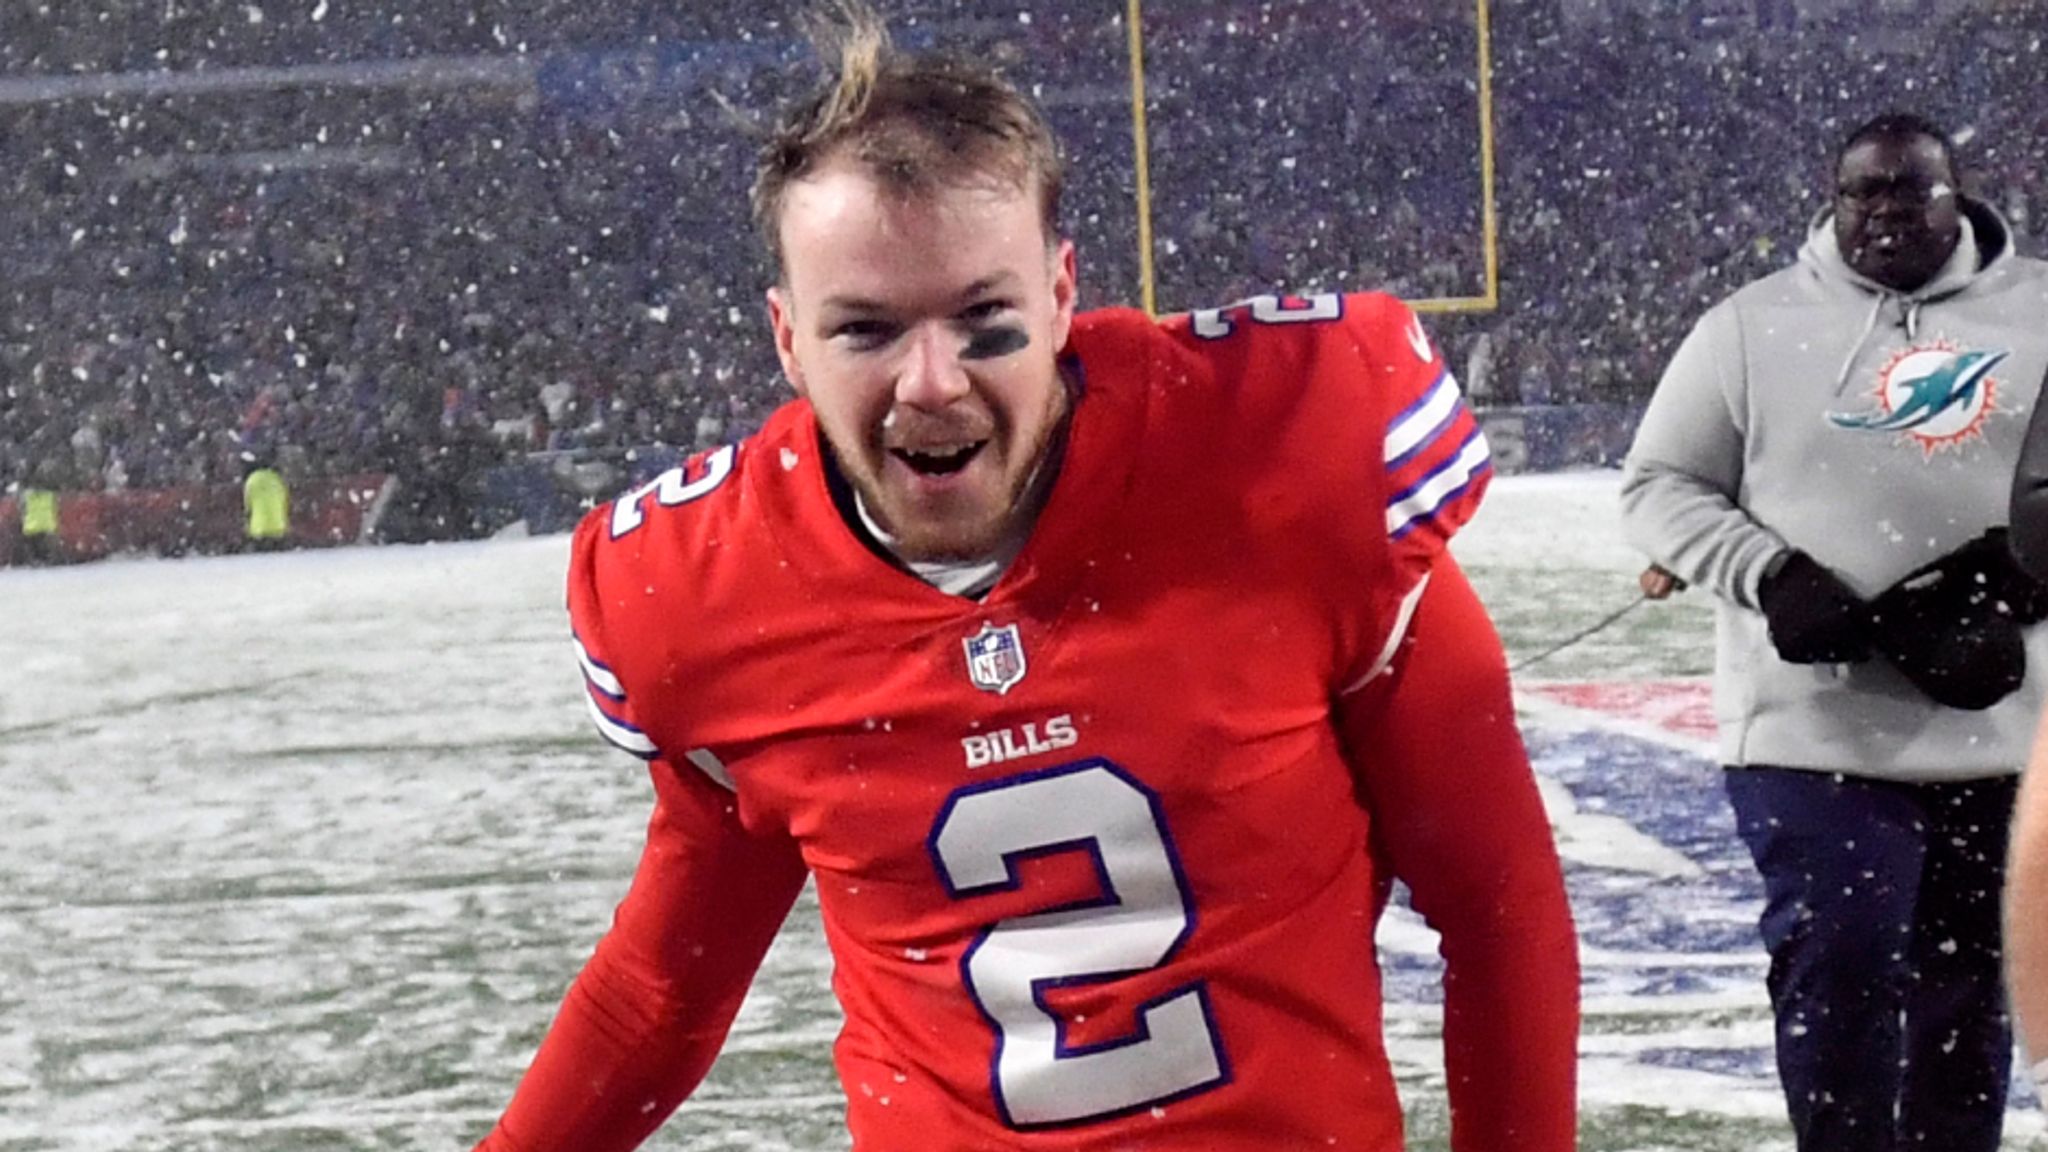 Buffalo Bills defeat Miami Dolphins on game-winning FG in snow game